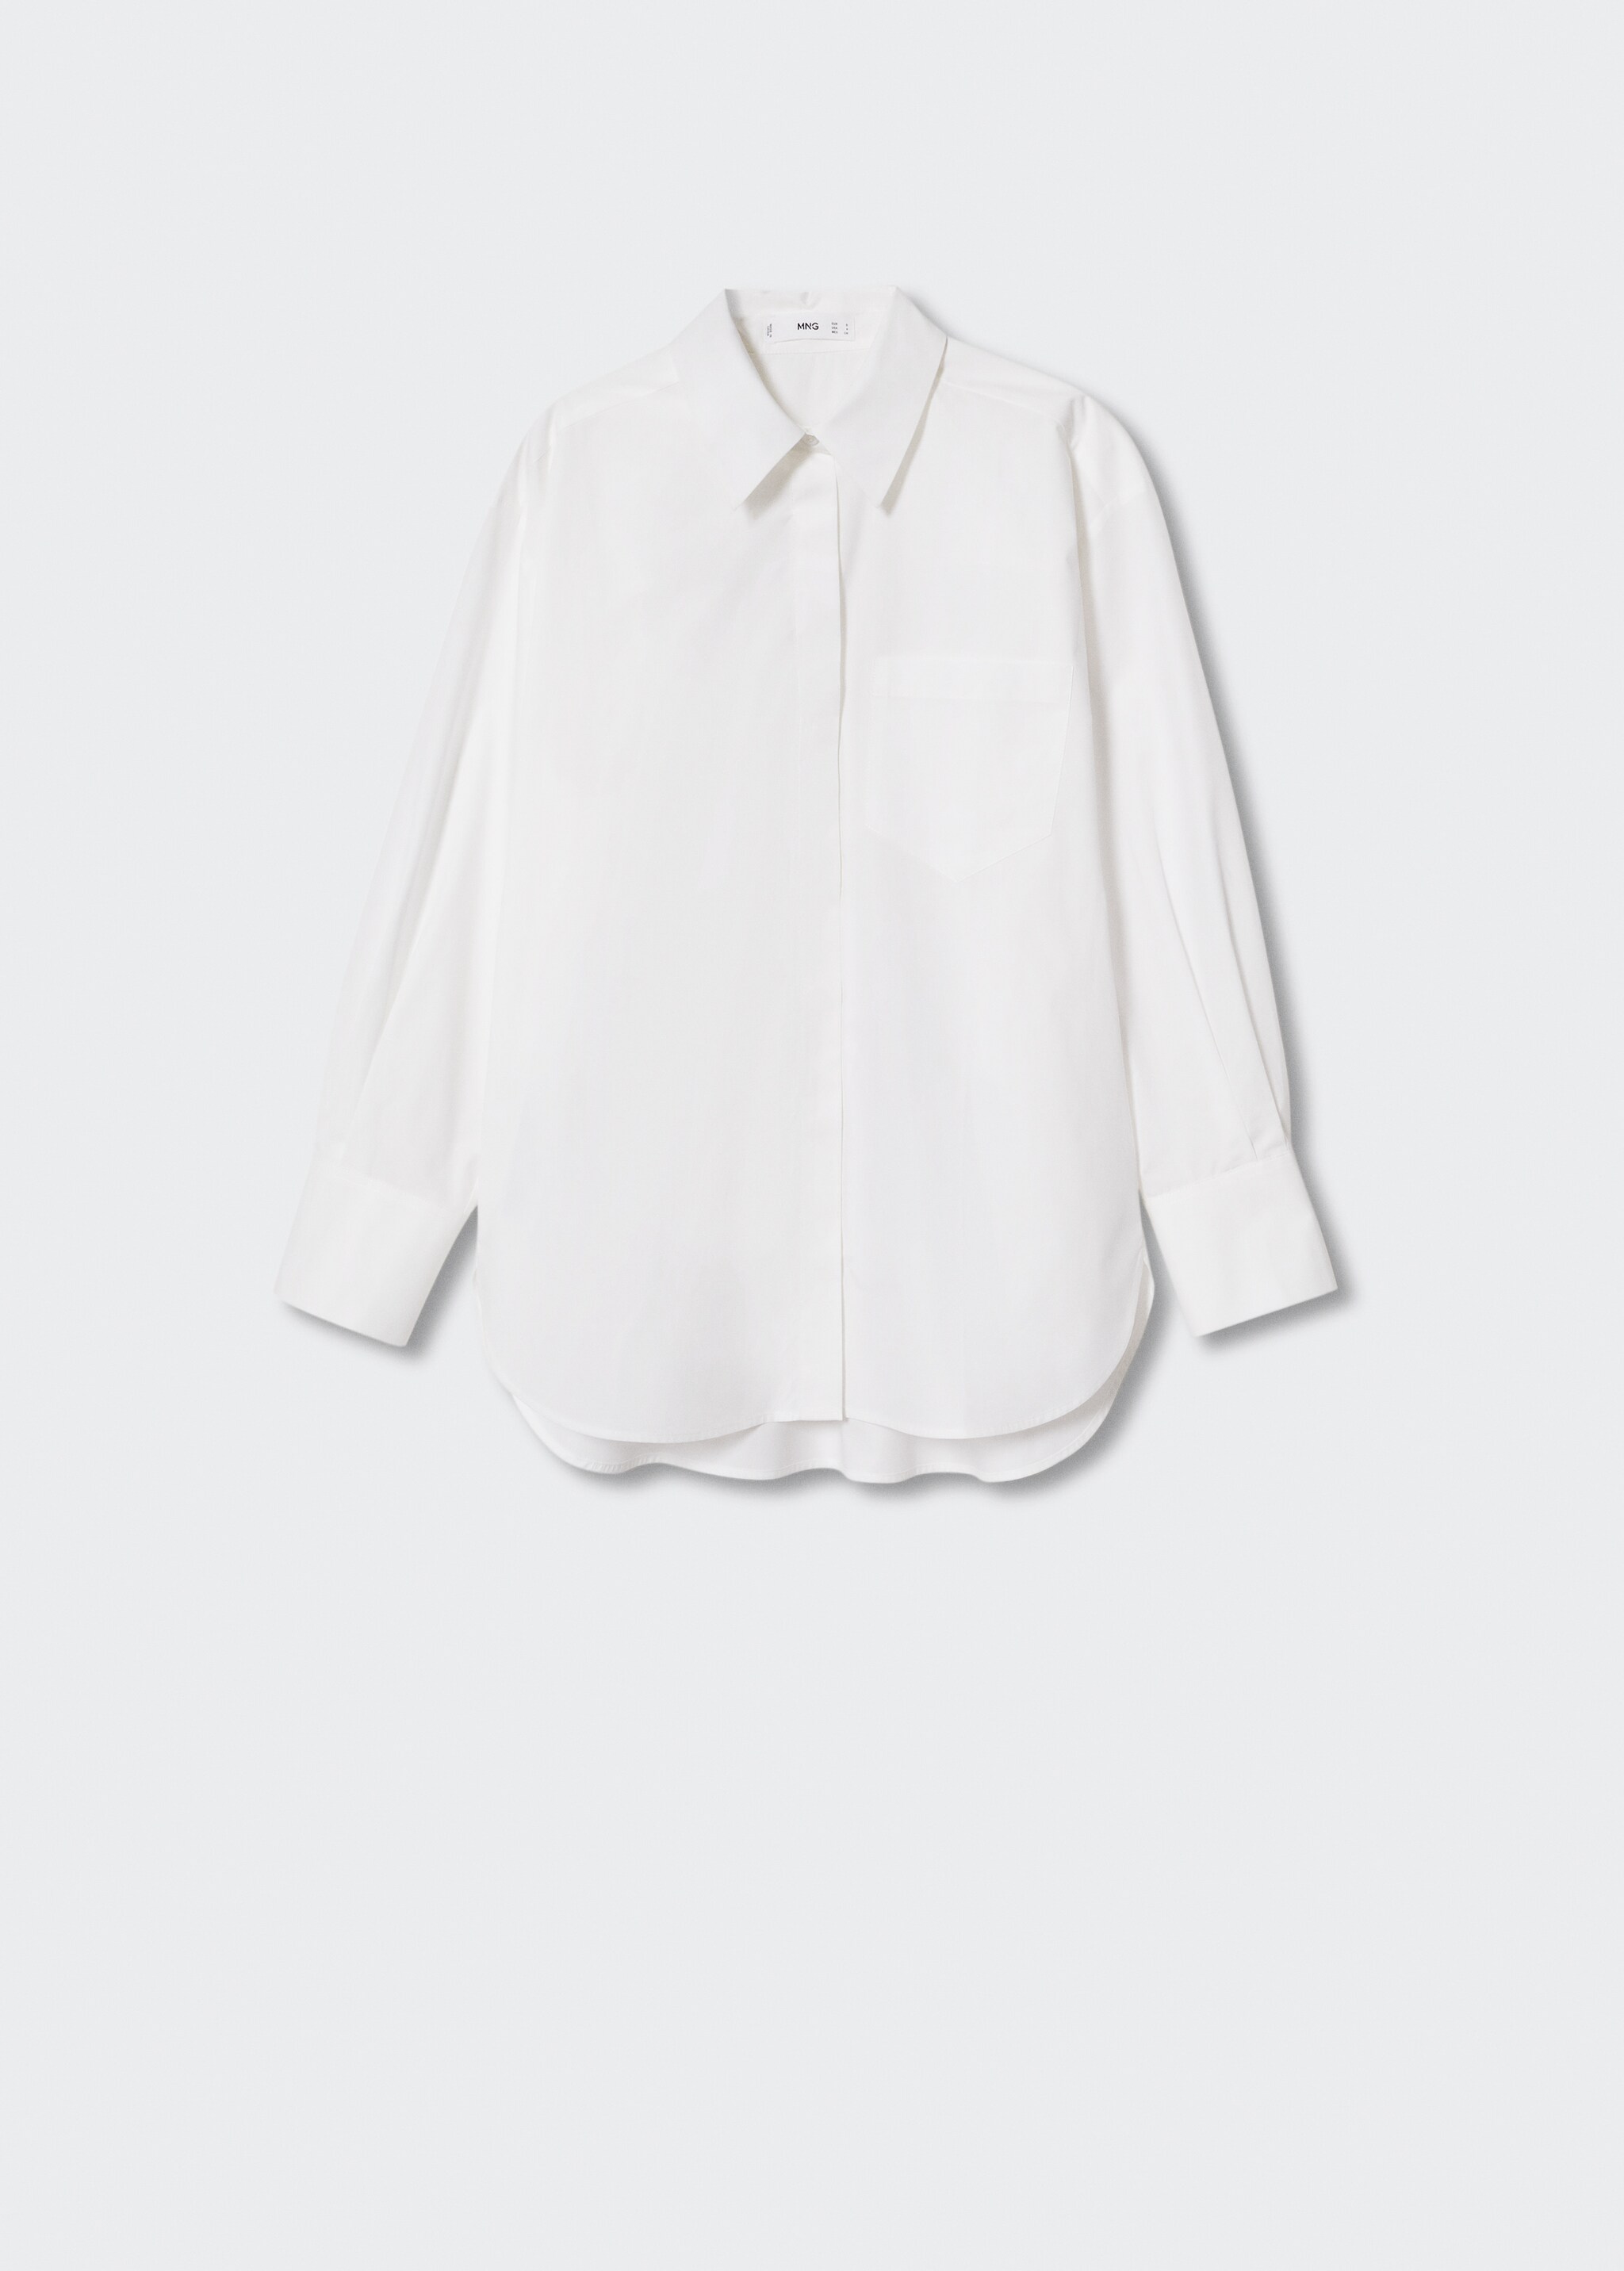 Oversize cotton shirt - Article without model